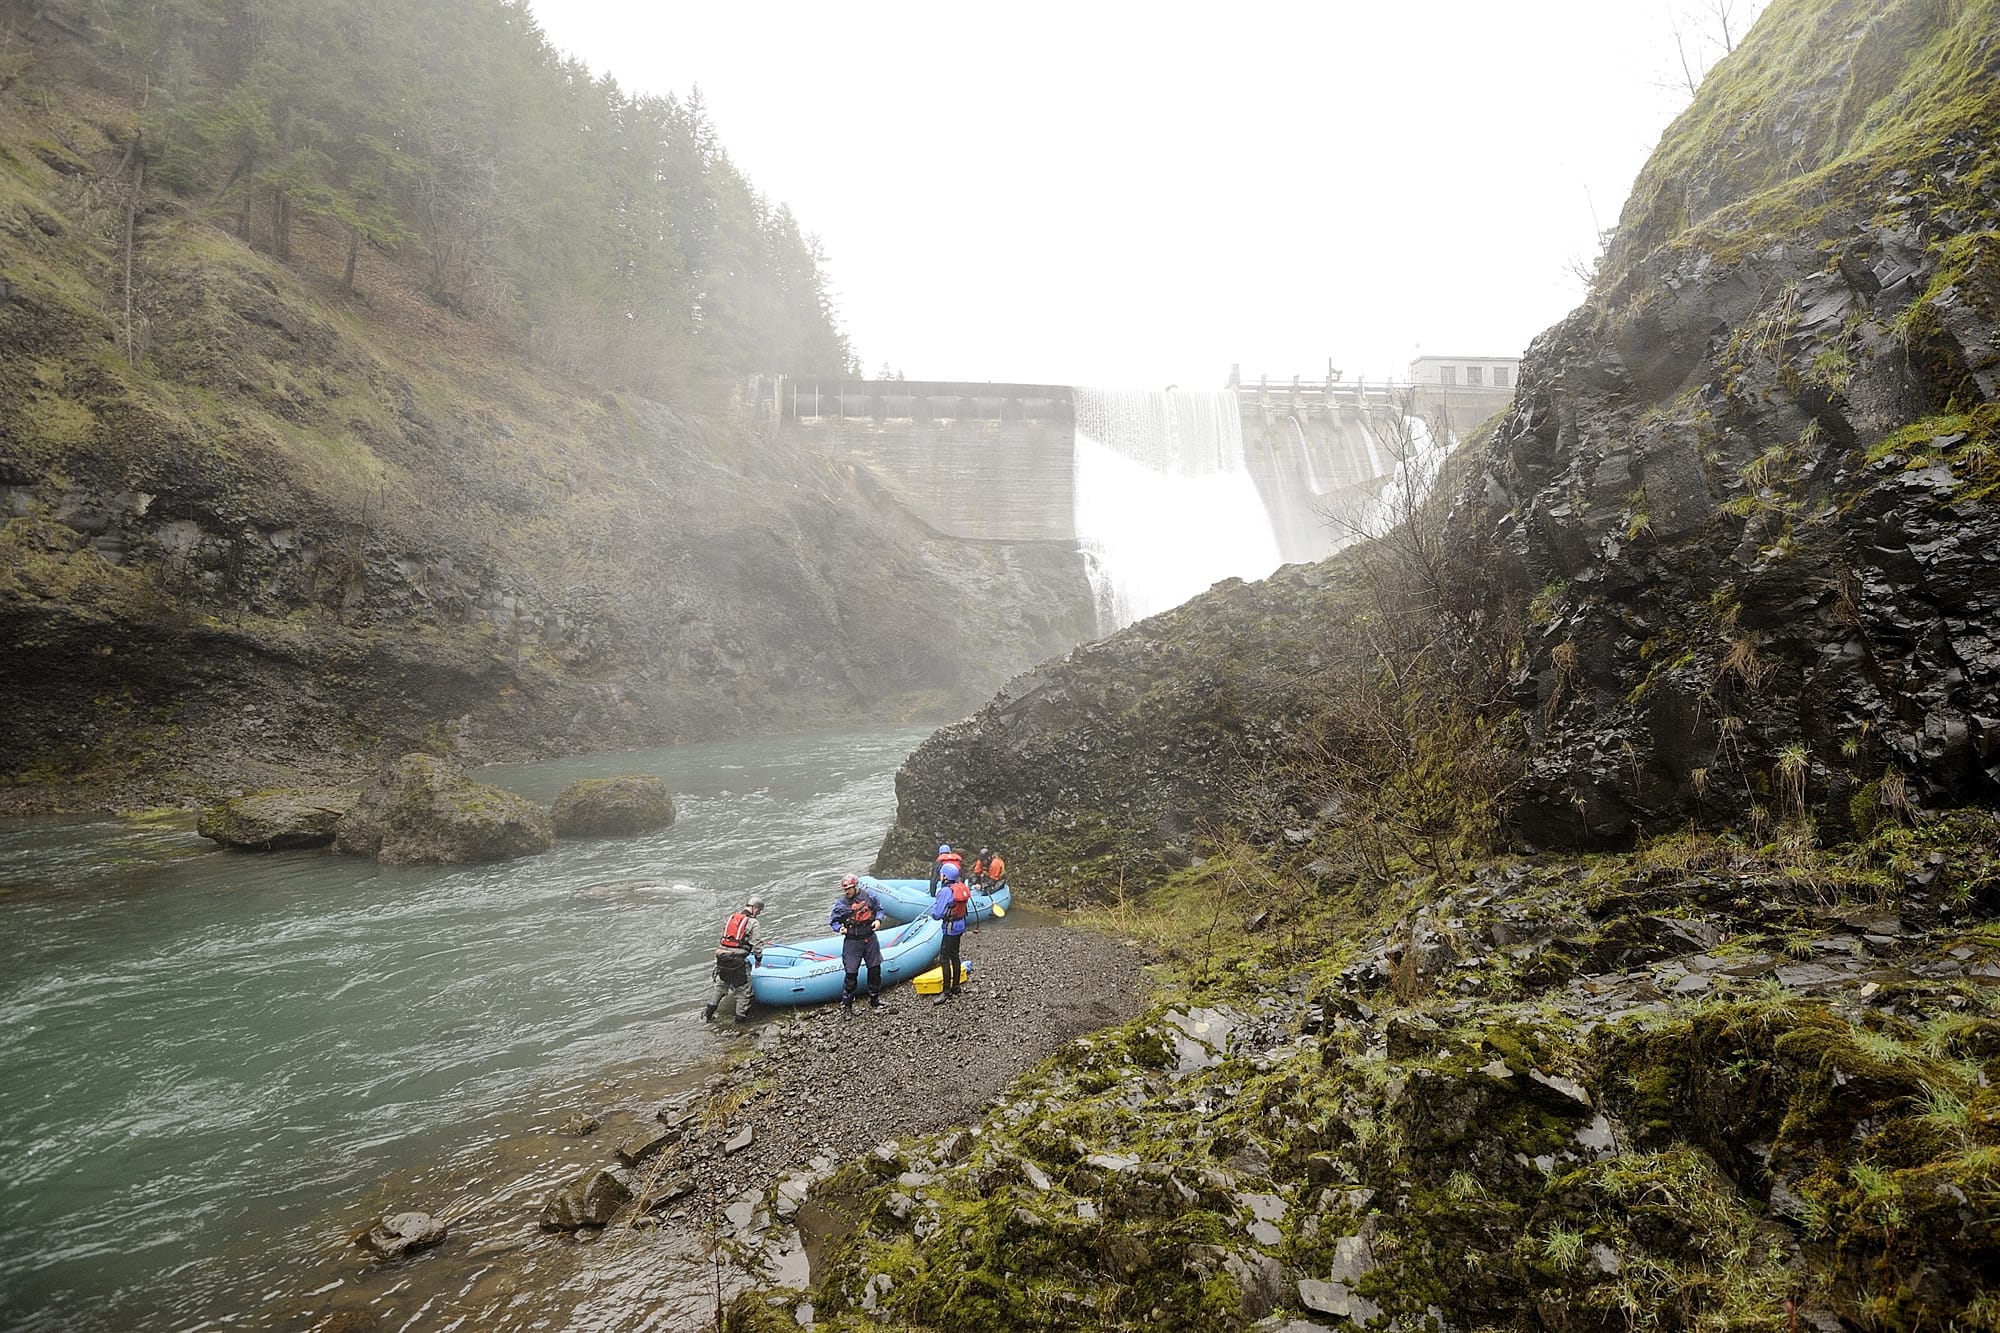 Rafters prepare to embark  down the White Salmon River from below the Condit Dam in March 2011 near White Salmon. The dam was blown out in October of that year and removed over the following months, and a long-term plan for the restored river's conservation is now under discussion.